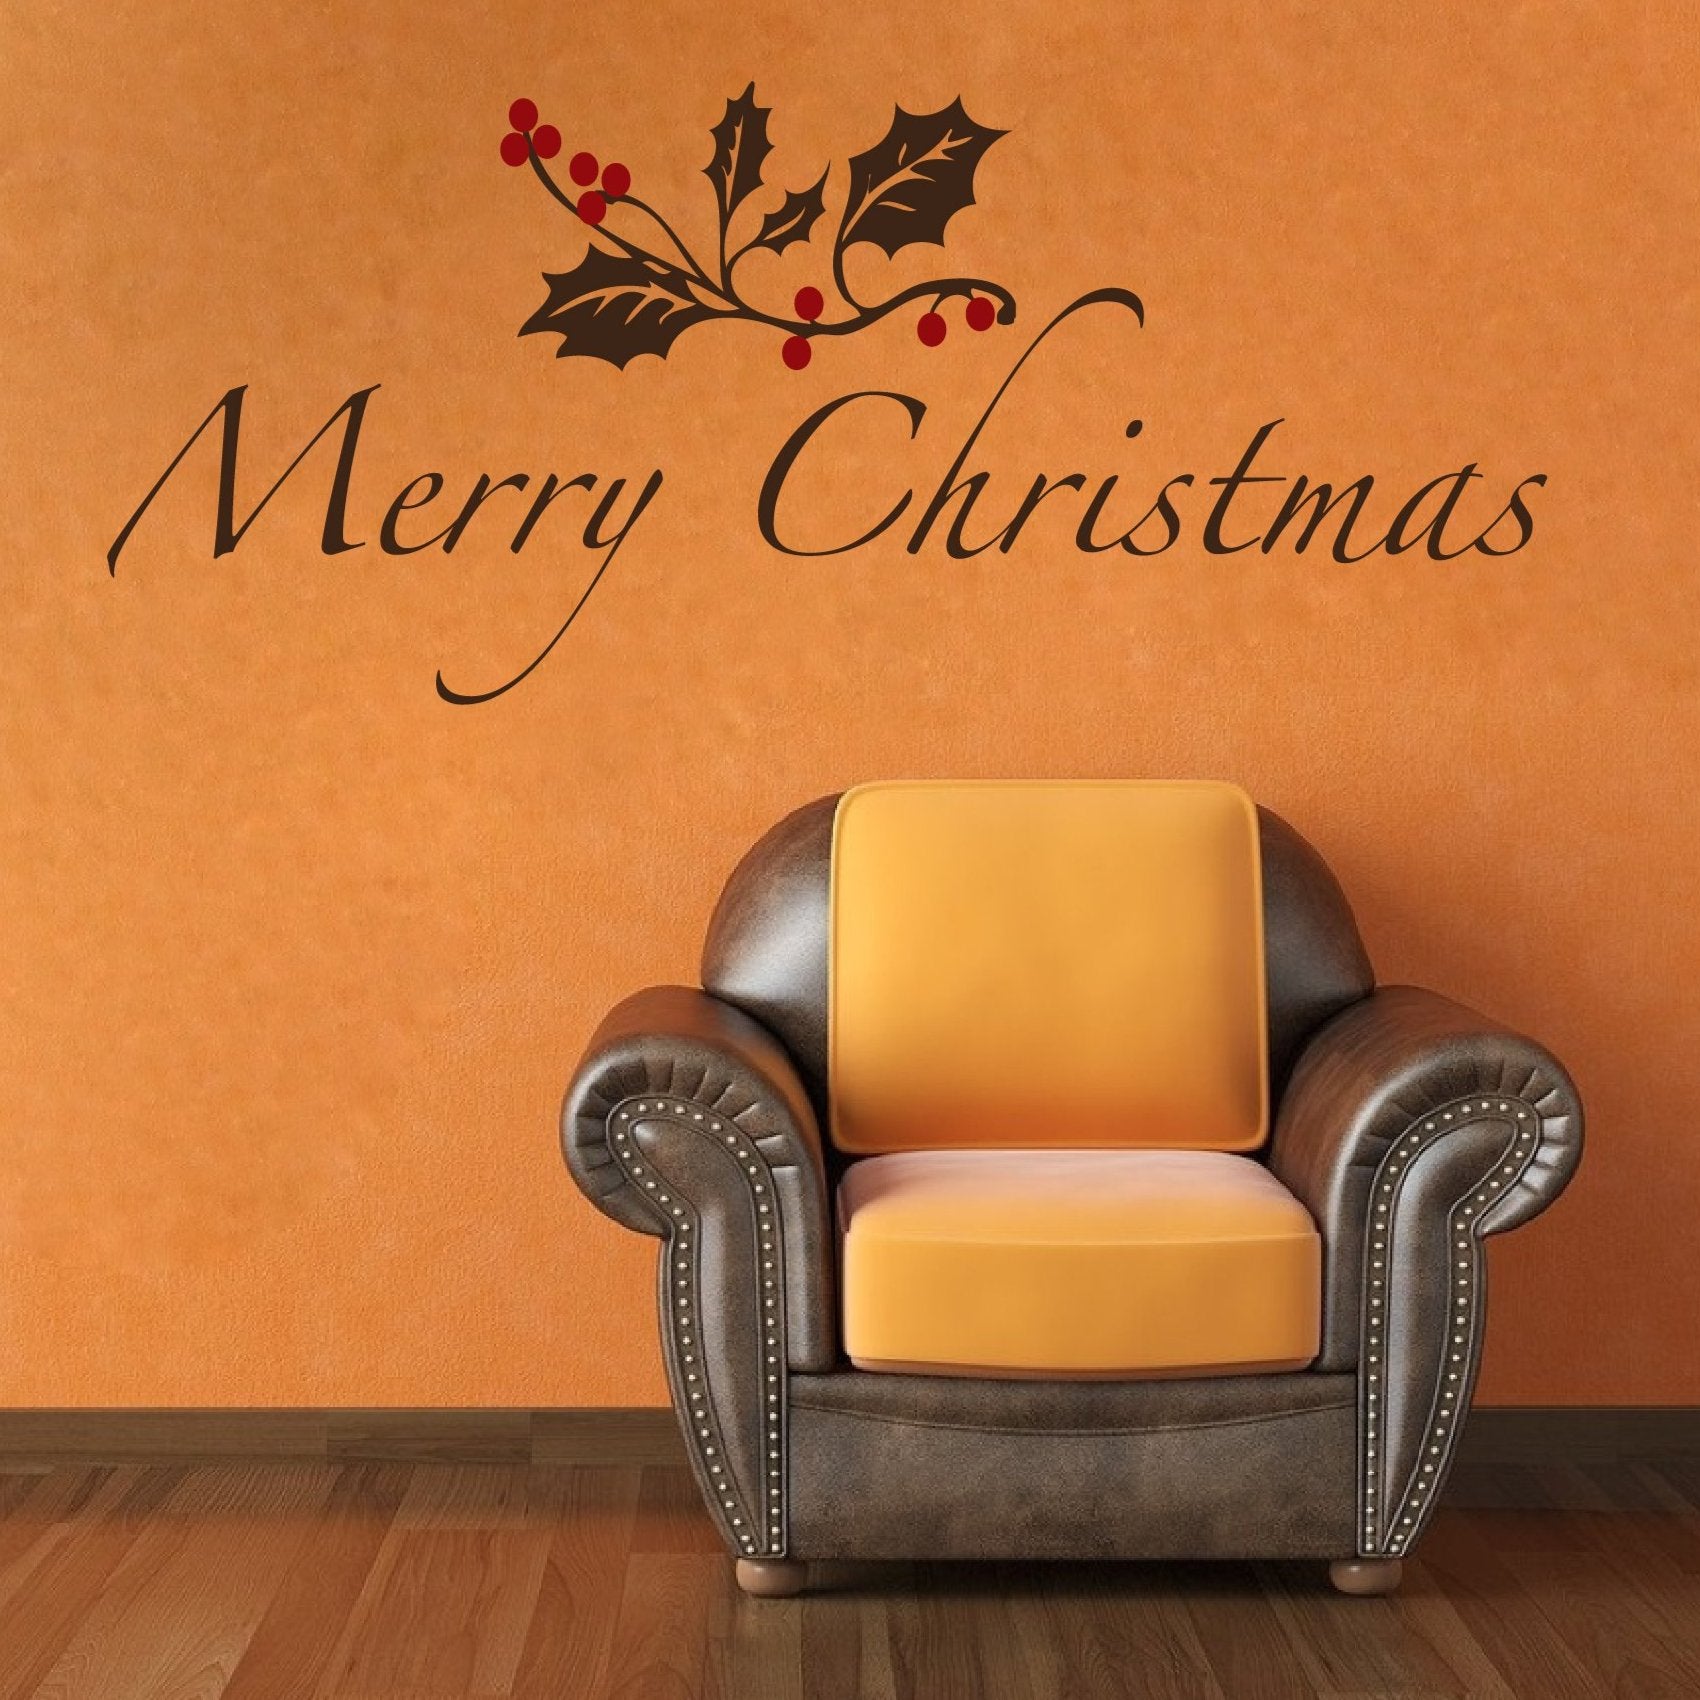 Merry Christmas Wall Decal Holiday Vinyl Quote